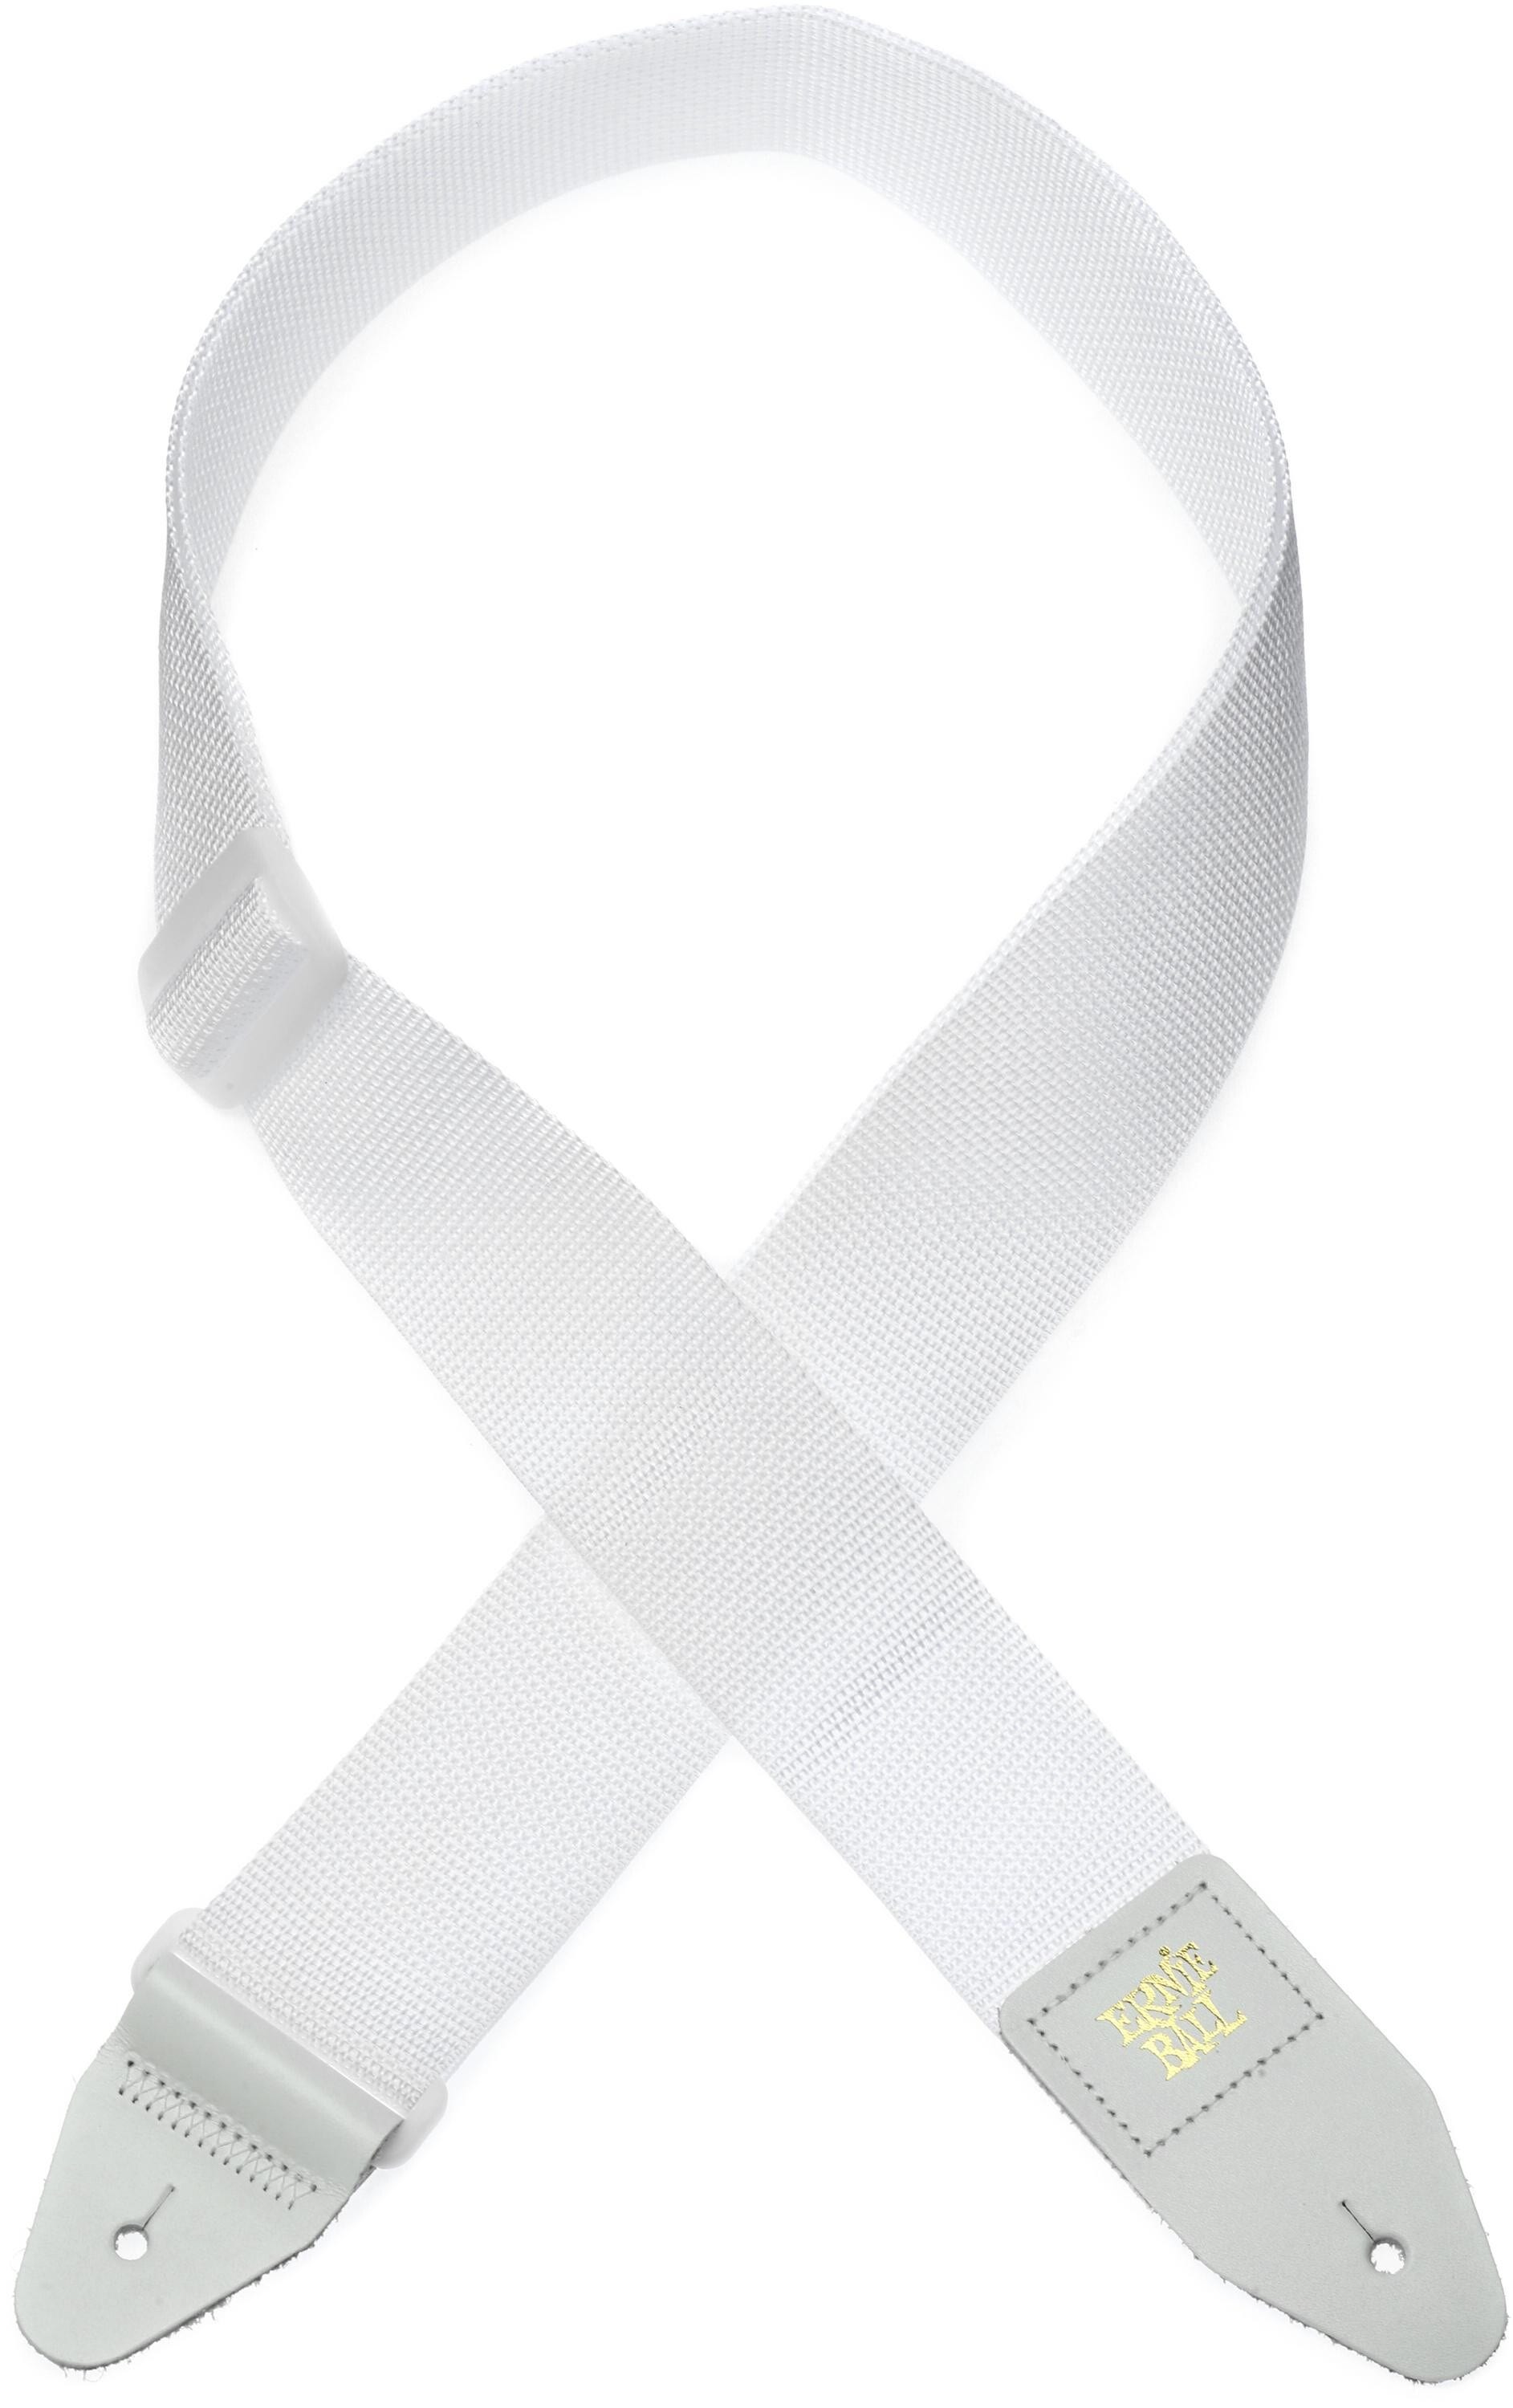 Ernie Ball 2-inch Polypro Strap - White and White | Sweetwater